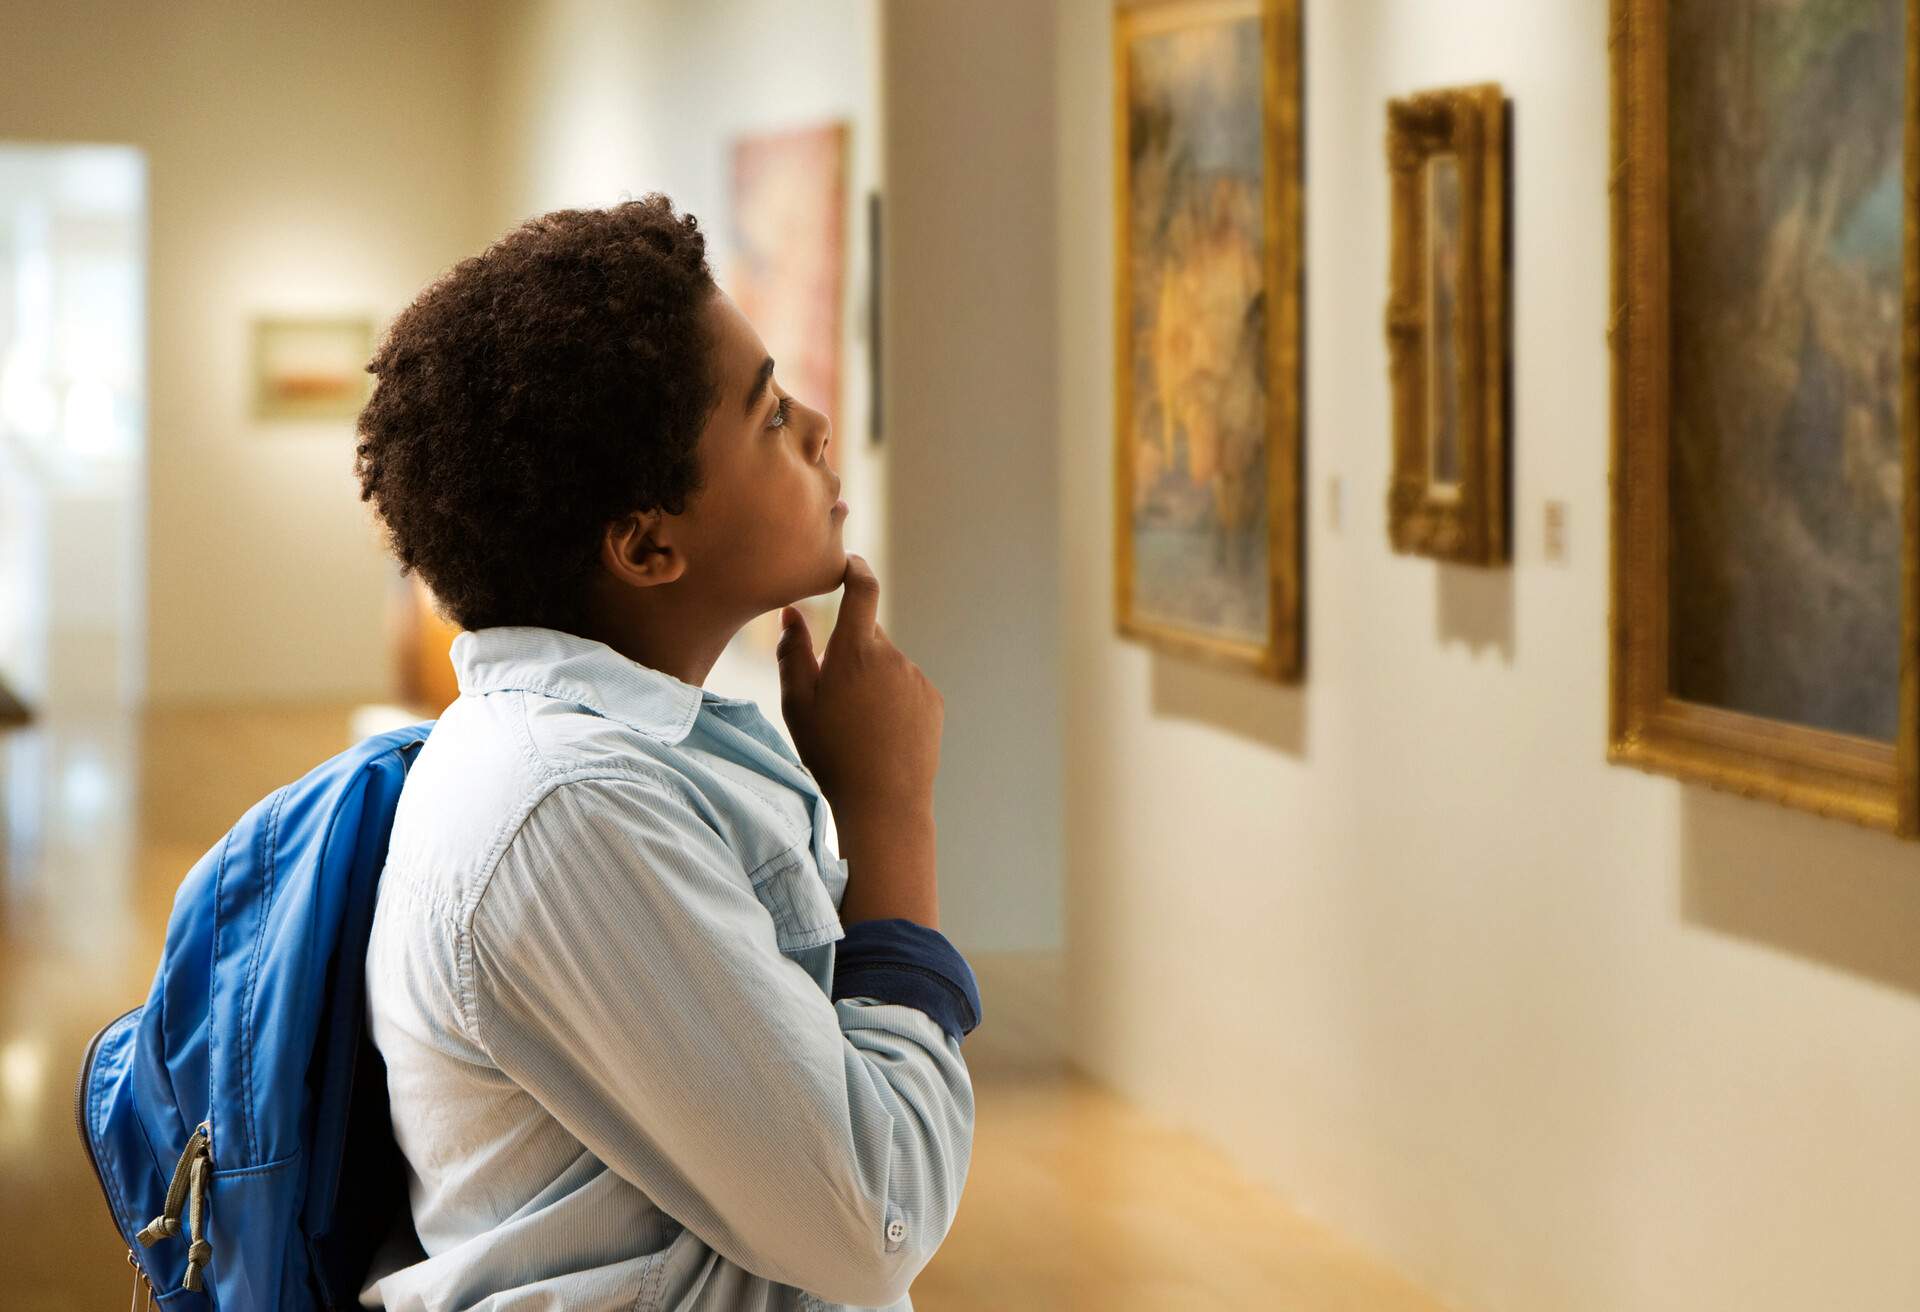 A person with a backpack gazes at a painting, hands thoughtfully resting on their chin, as they appear to be contemplating the artwork's meaning.